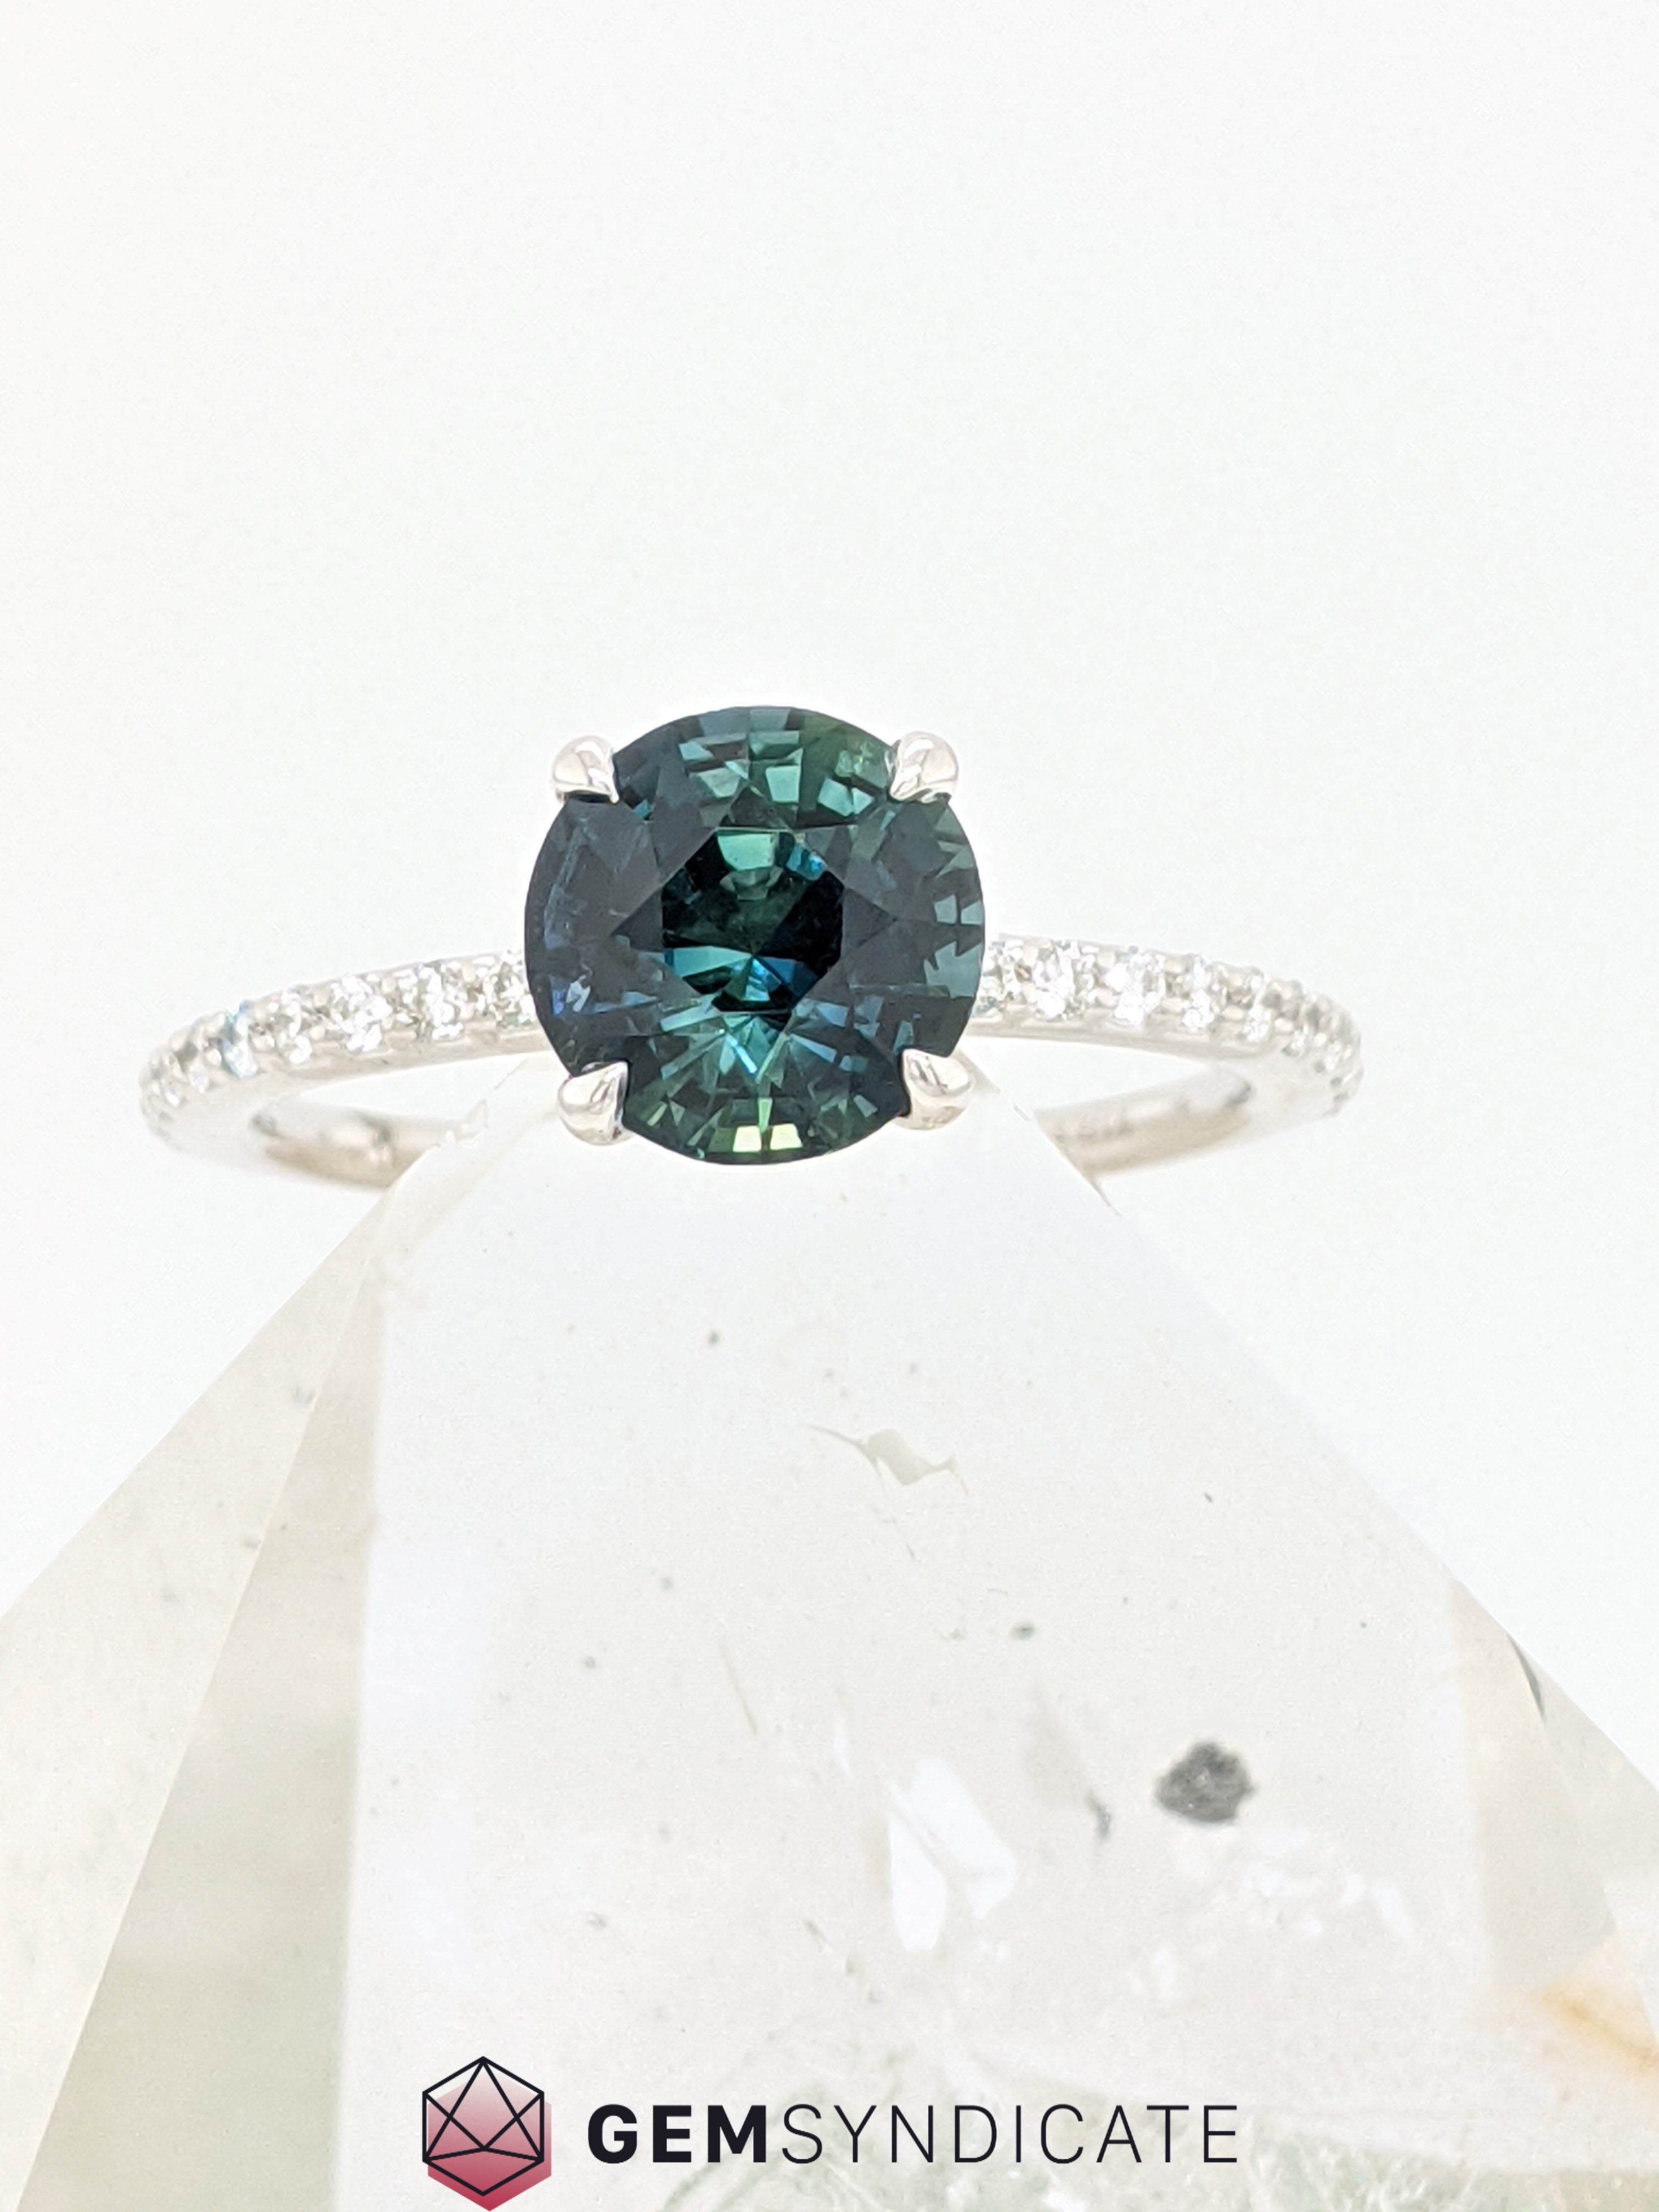 Astounding Round Teal Sapphire Ring in 14k White Gold